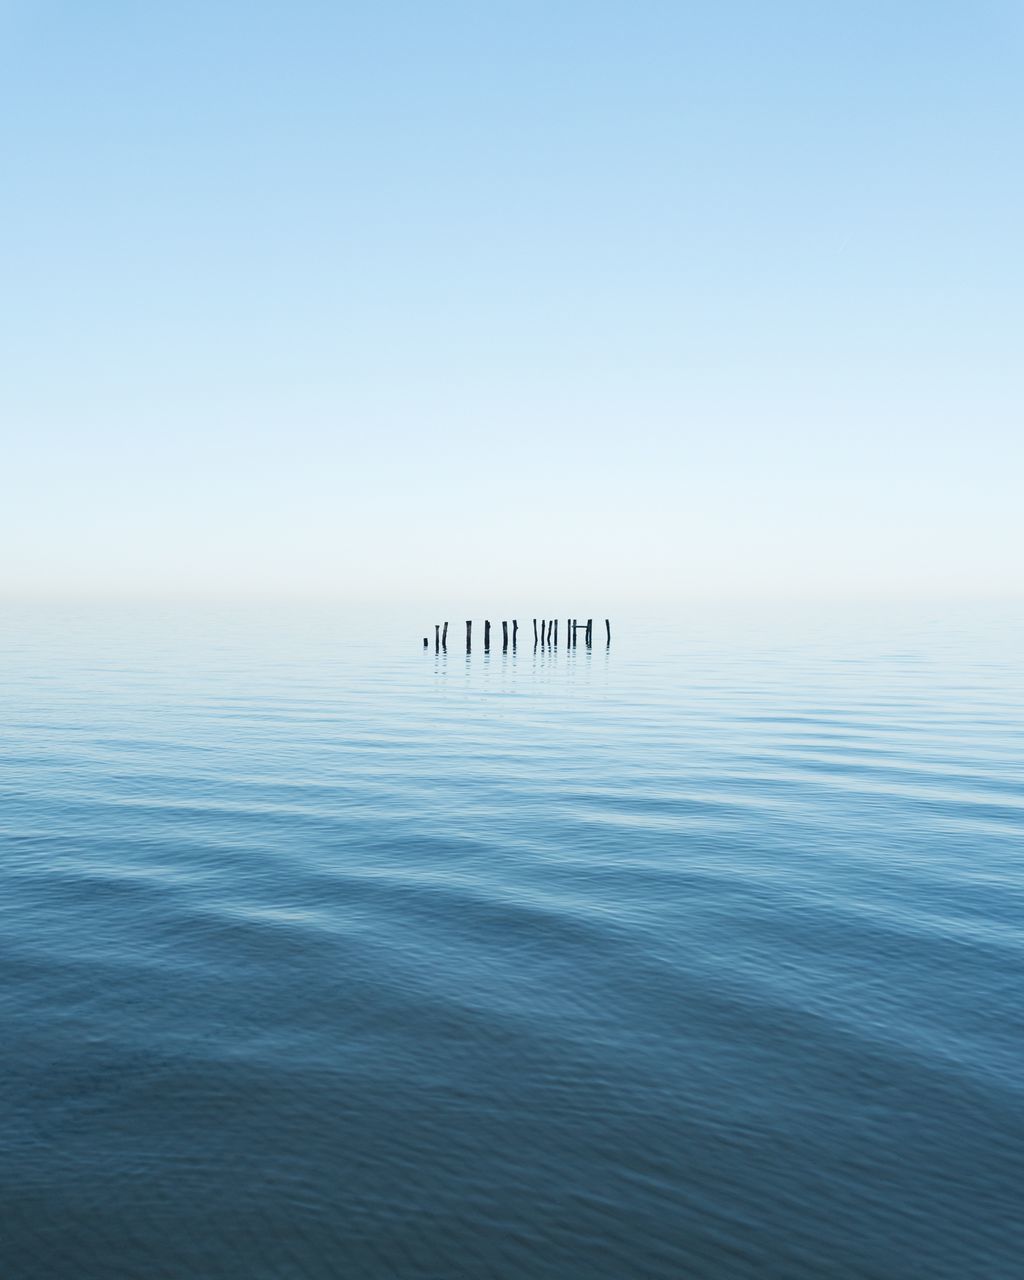 water, waterfront, sky, tranquil scene, tranquility, beauty in nature, scenics - nature, nature, clear sky, sea, blue, day, no people, vertebrate, horizon, bird, copy space, animals in the wild, animal themes, horizon over water, wooden post